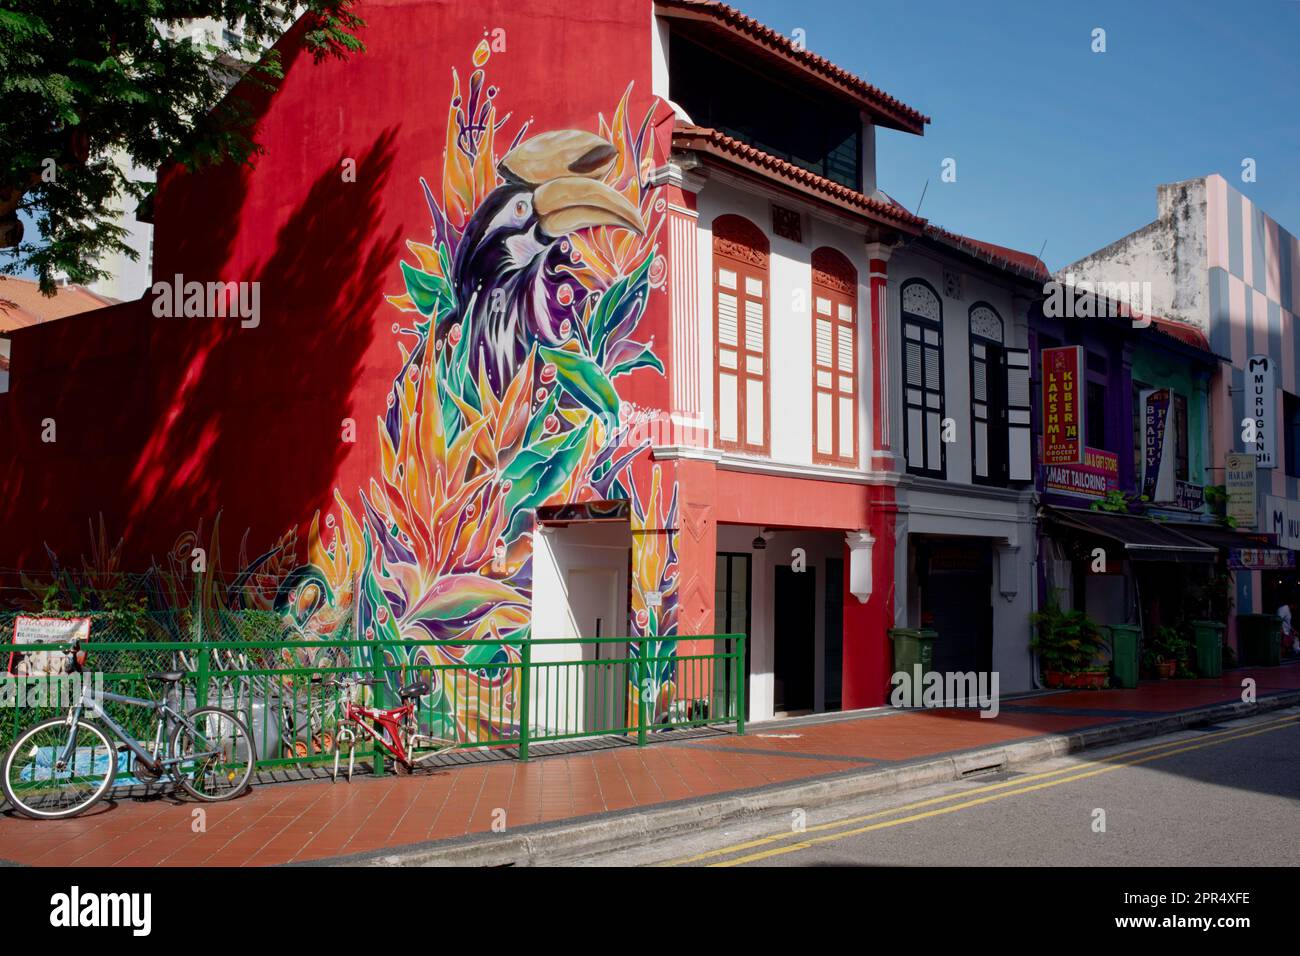 A colorfully painted traditional Chinese shophouse with latticed windows in Syed Alwi Road, Little India, Singapore Stock Photo